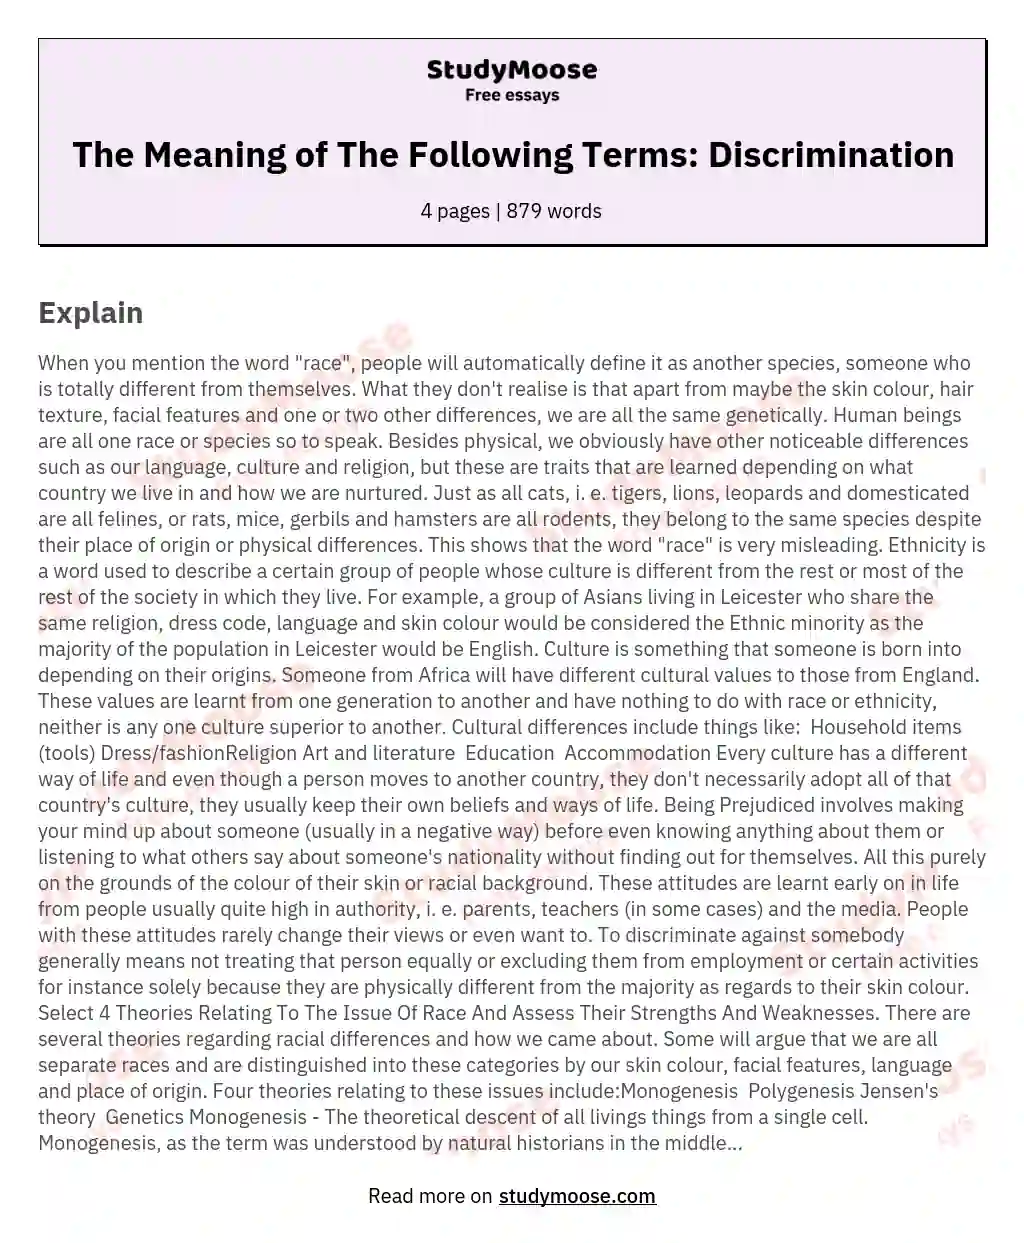 The Meaning of The Following Terms: Discrimination essay